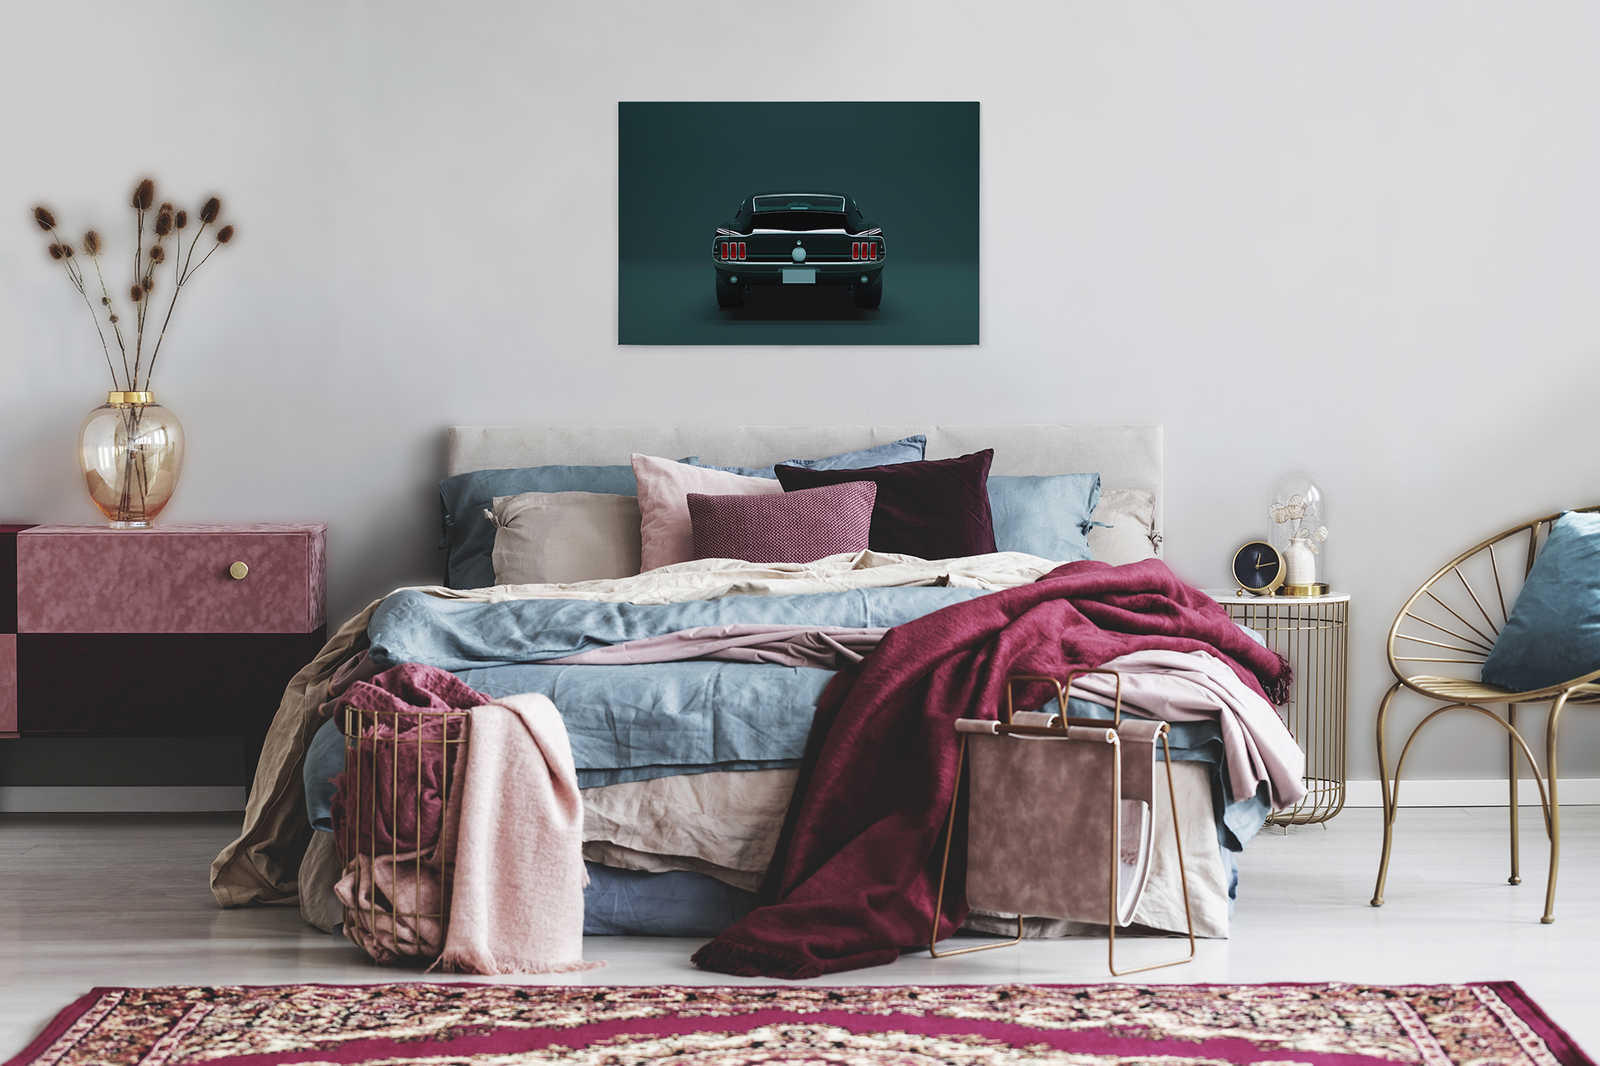             Mustang 3 - American Muscle Car Canvas Painting - 0.90 m x 0.60 m
        